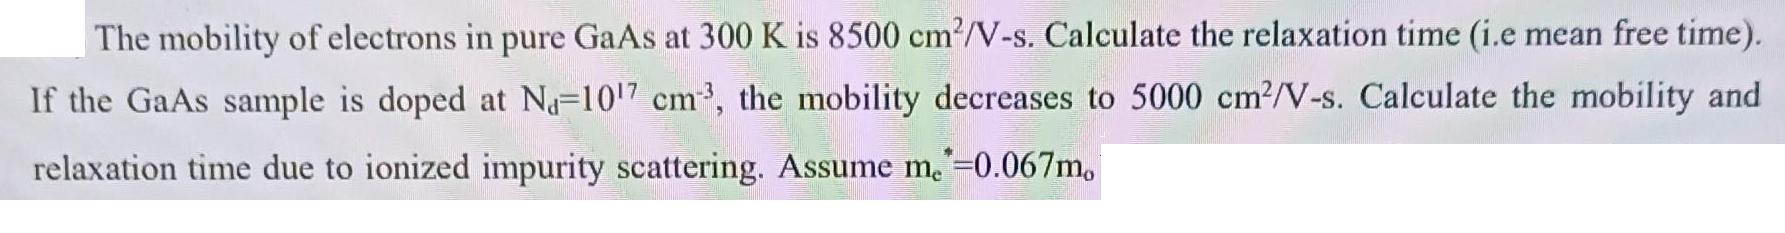 The mobility of electrons in pure GaAs at 300 K is 8500 cm/V-s. Calculate the relaxation time (i.e mean free